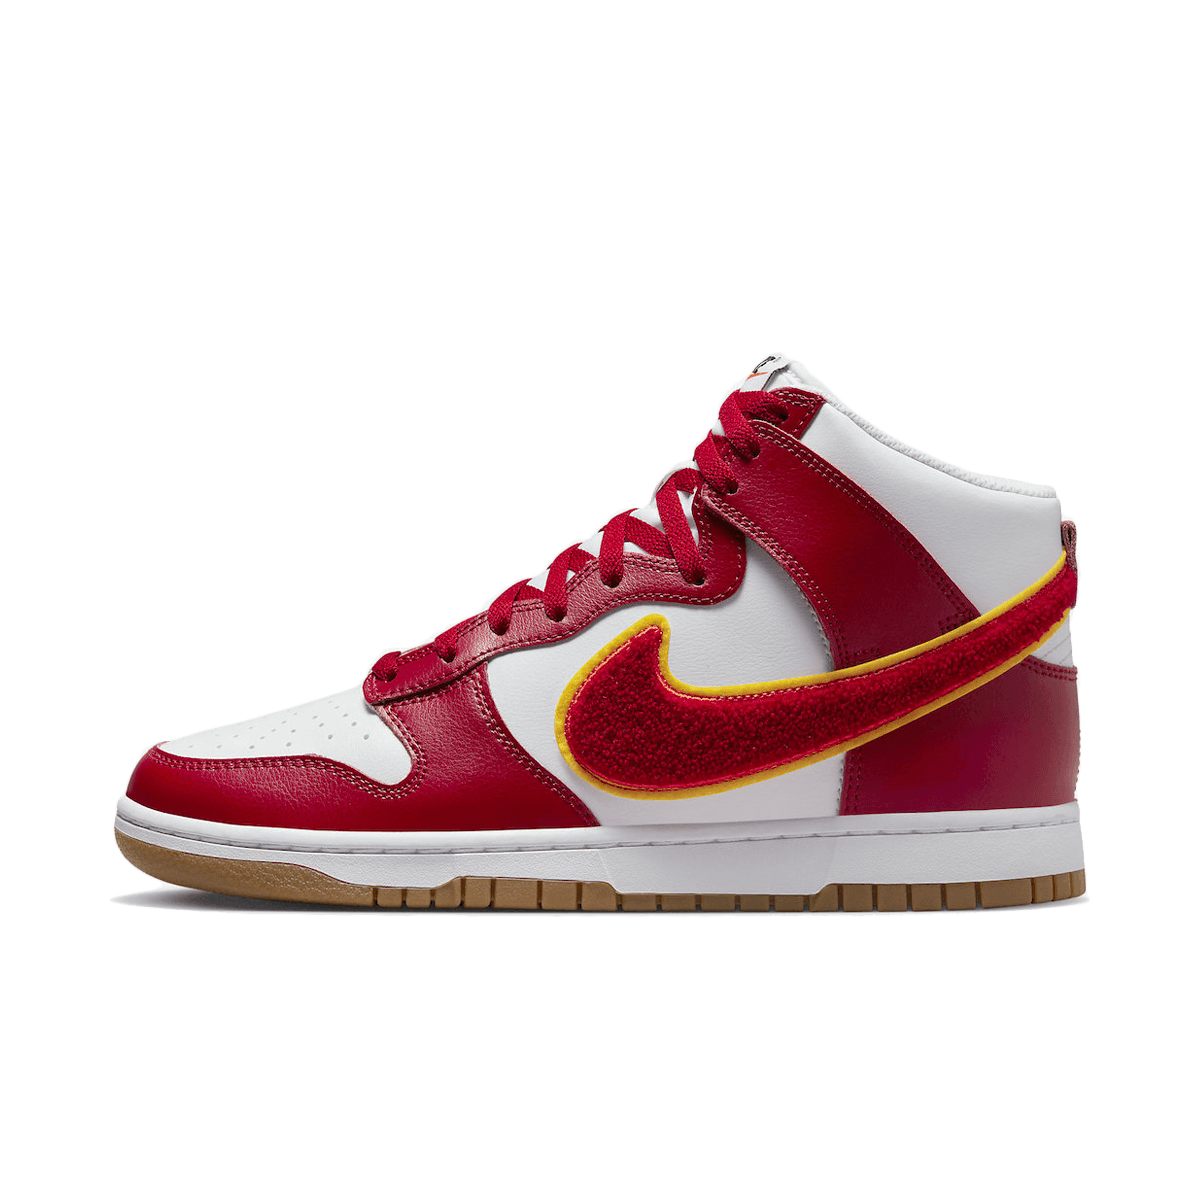 Nike Dunk High 'Gym Red' - Chenille Swoosh